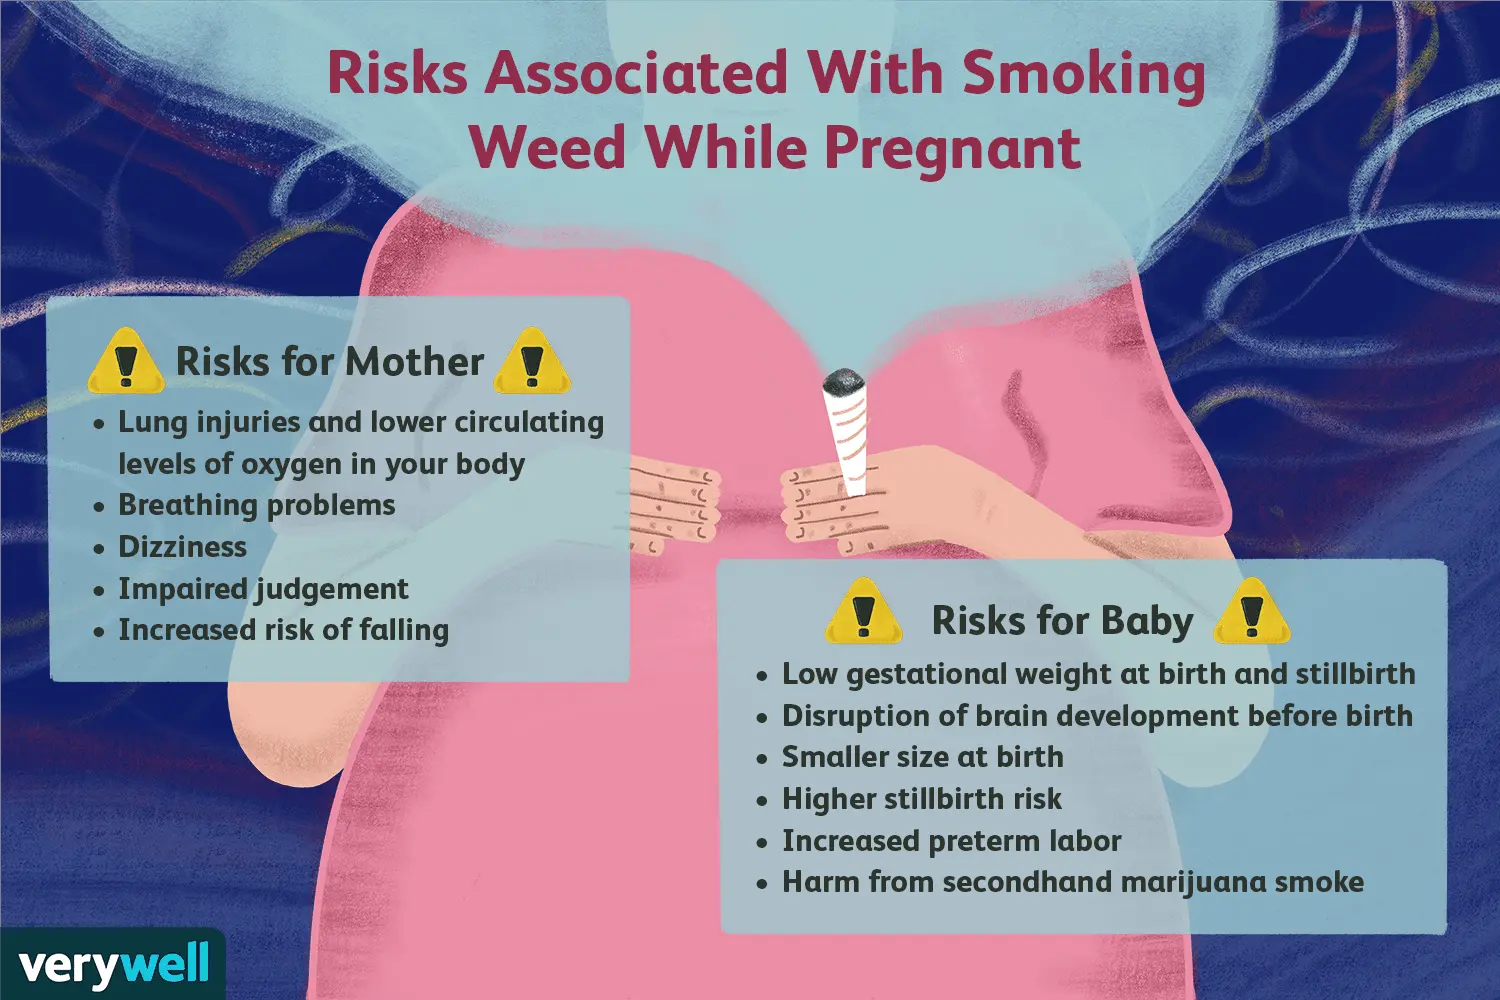 i smoked during early pregnancy - Can smoking cause miscarriage at 5 weeks